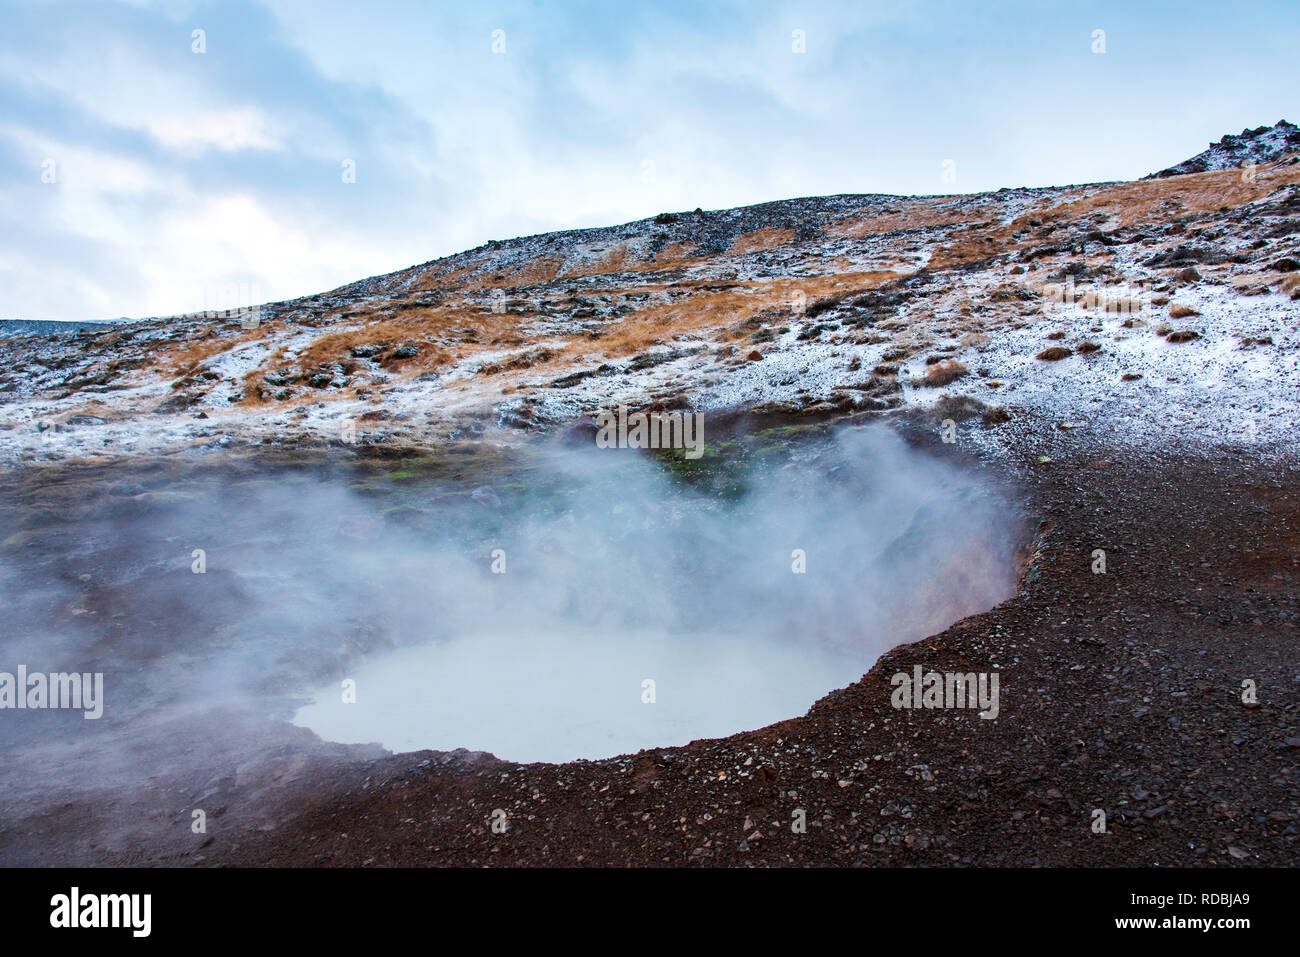 Thermal hot water springs near Reykjadalur in Iceland Stock Photo